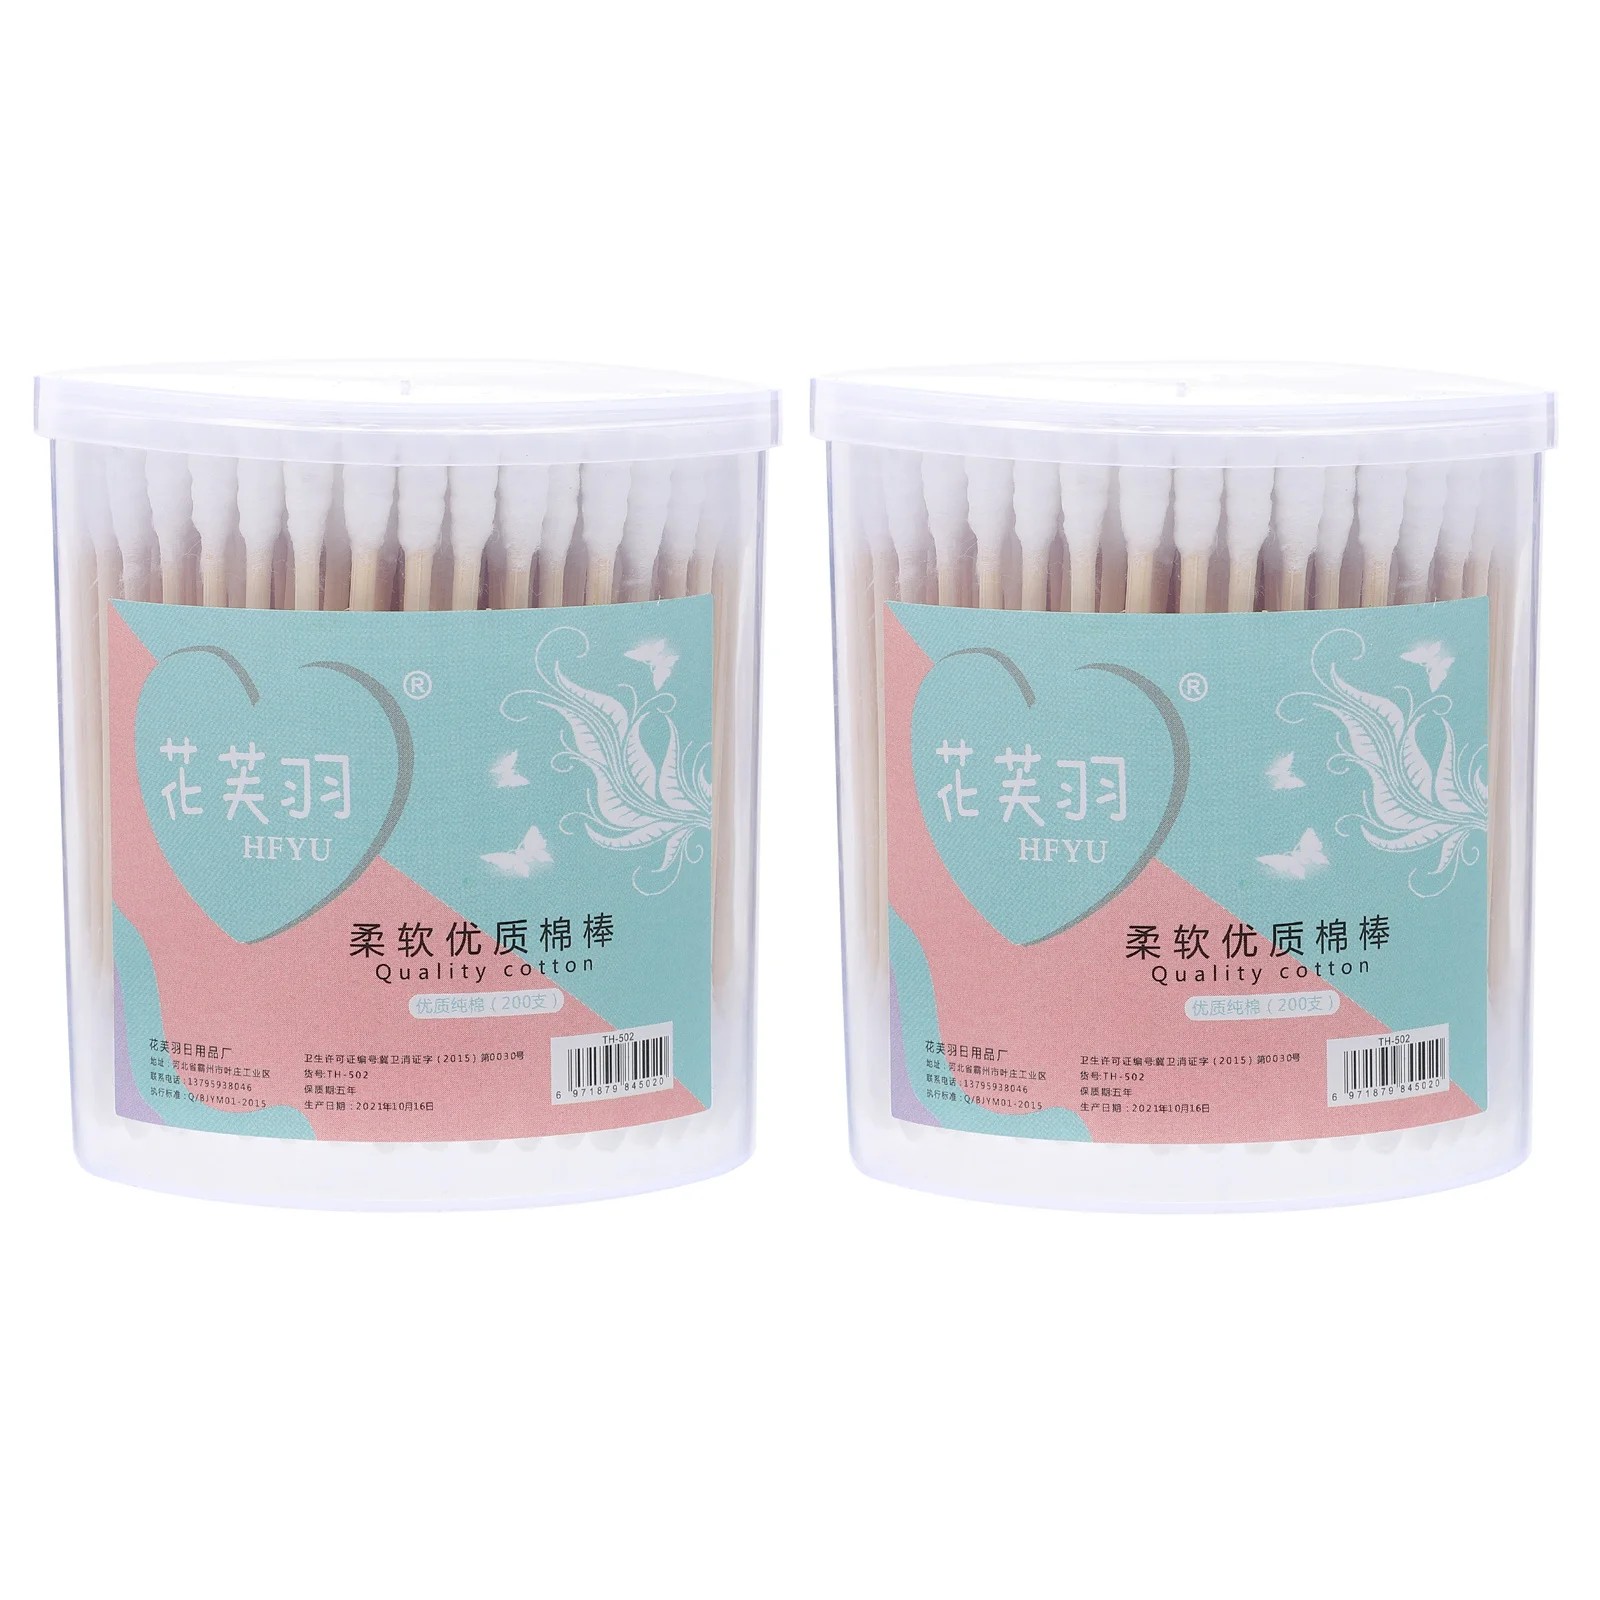 

Cotton Swabs Ear Swab Buds Sticks Sticktips Baby Cleaning Q Applicator Double Biodegradable Tiphead Sterile Makeup Tipped